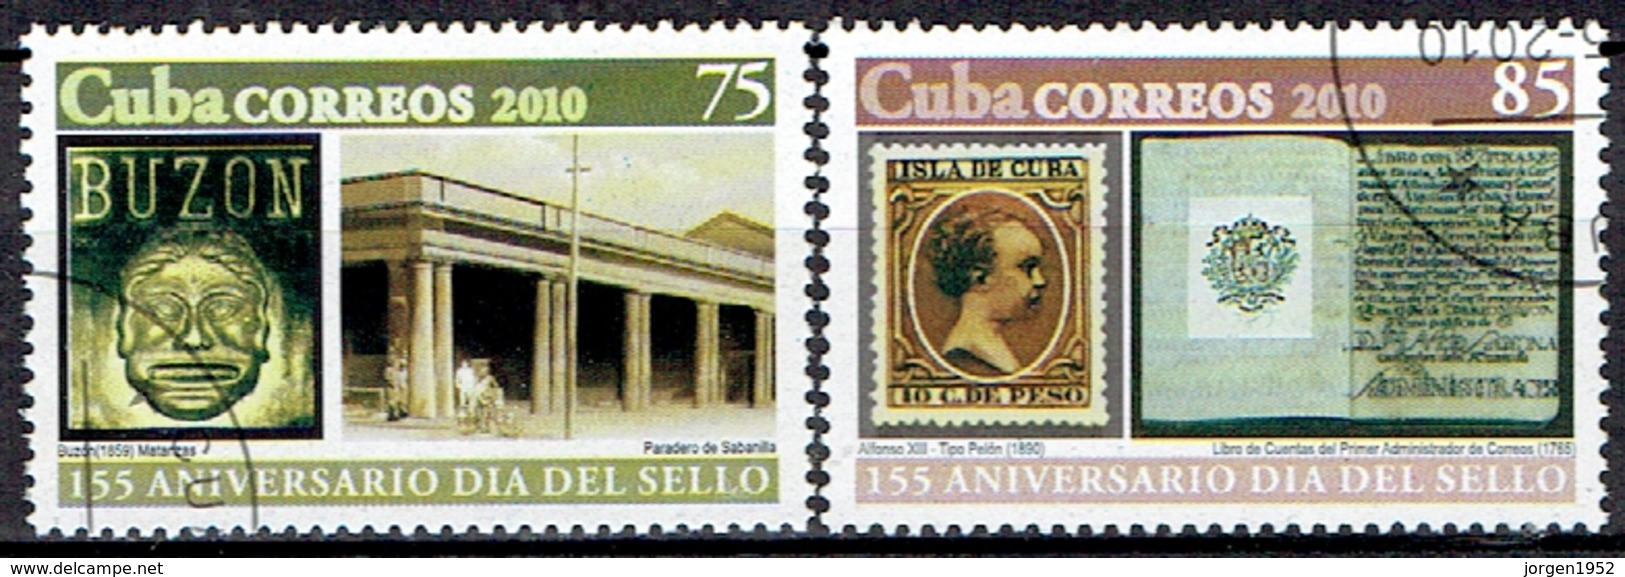 CUBA # FROM 2010 STAMPWORLD 5399-00 - Used Stamps